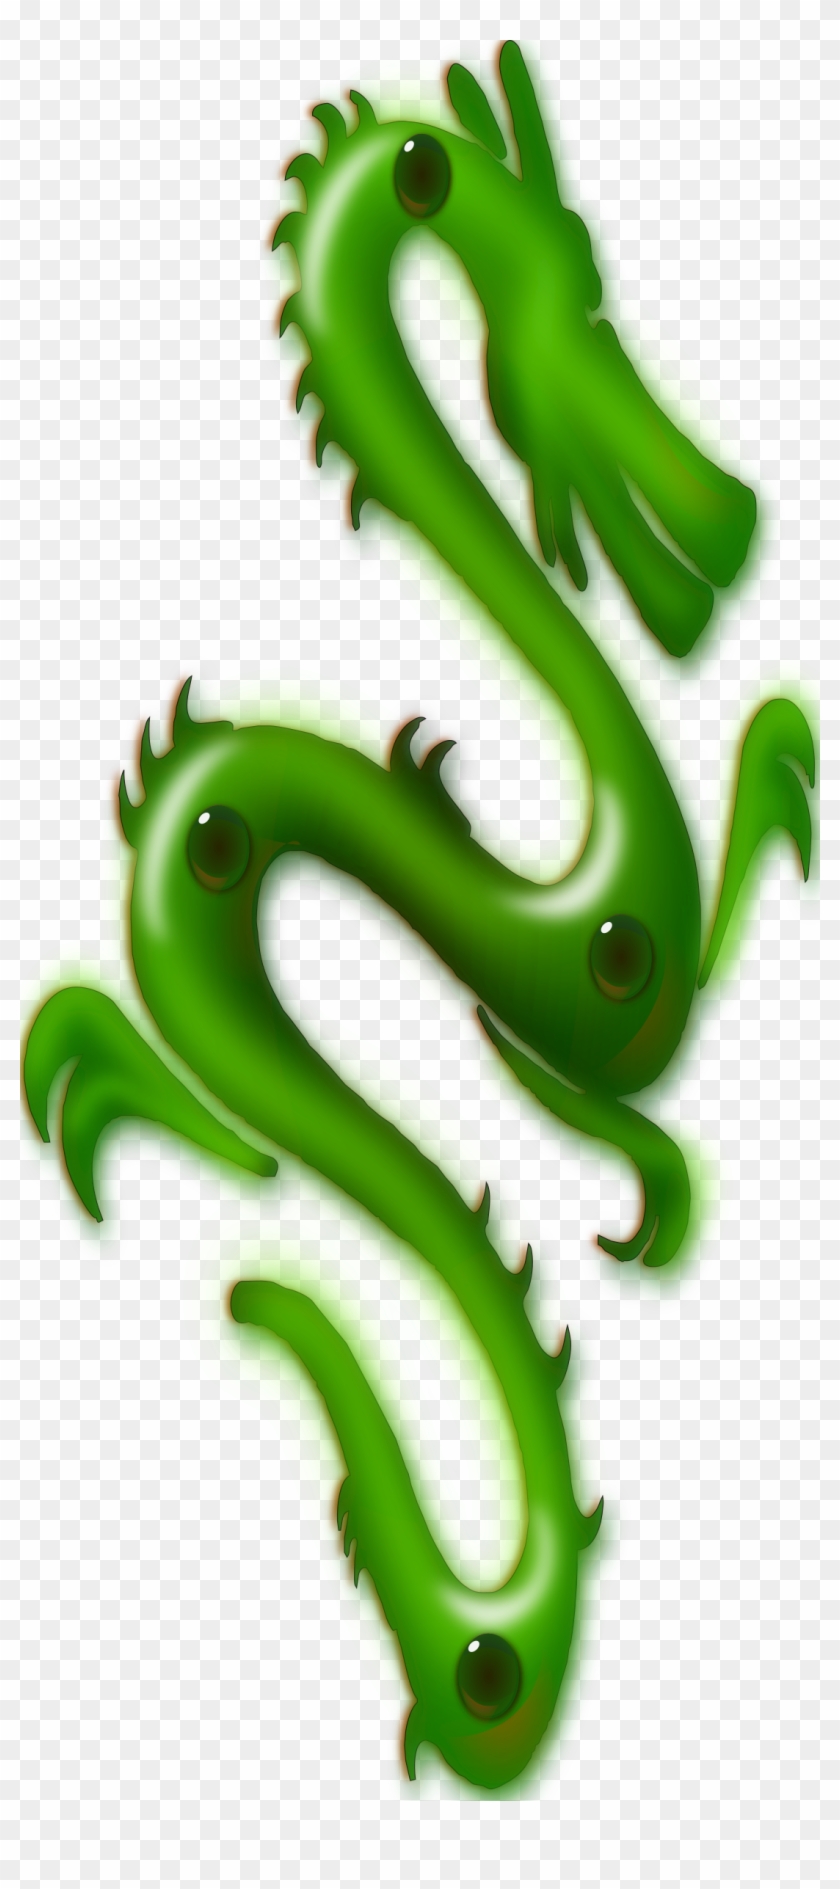 This Free Icons Png Design Of Jade Dragon Clipart